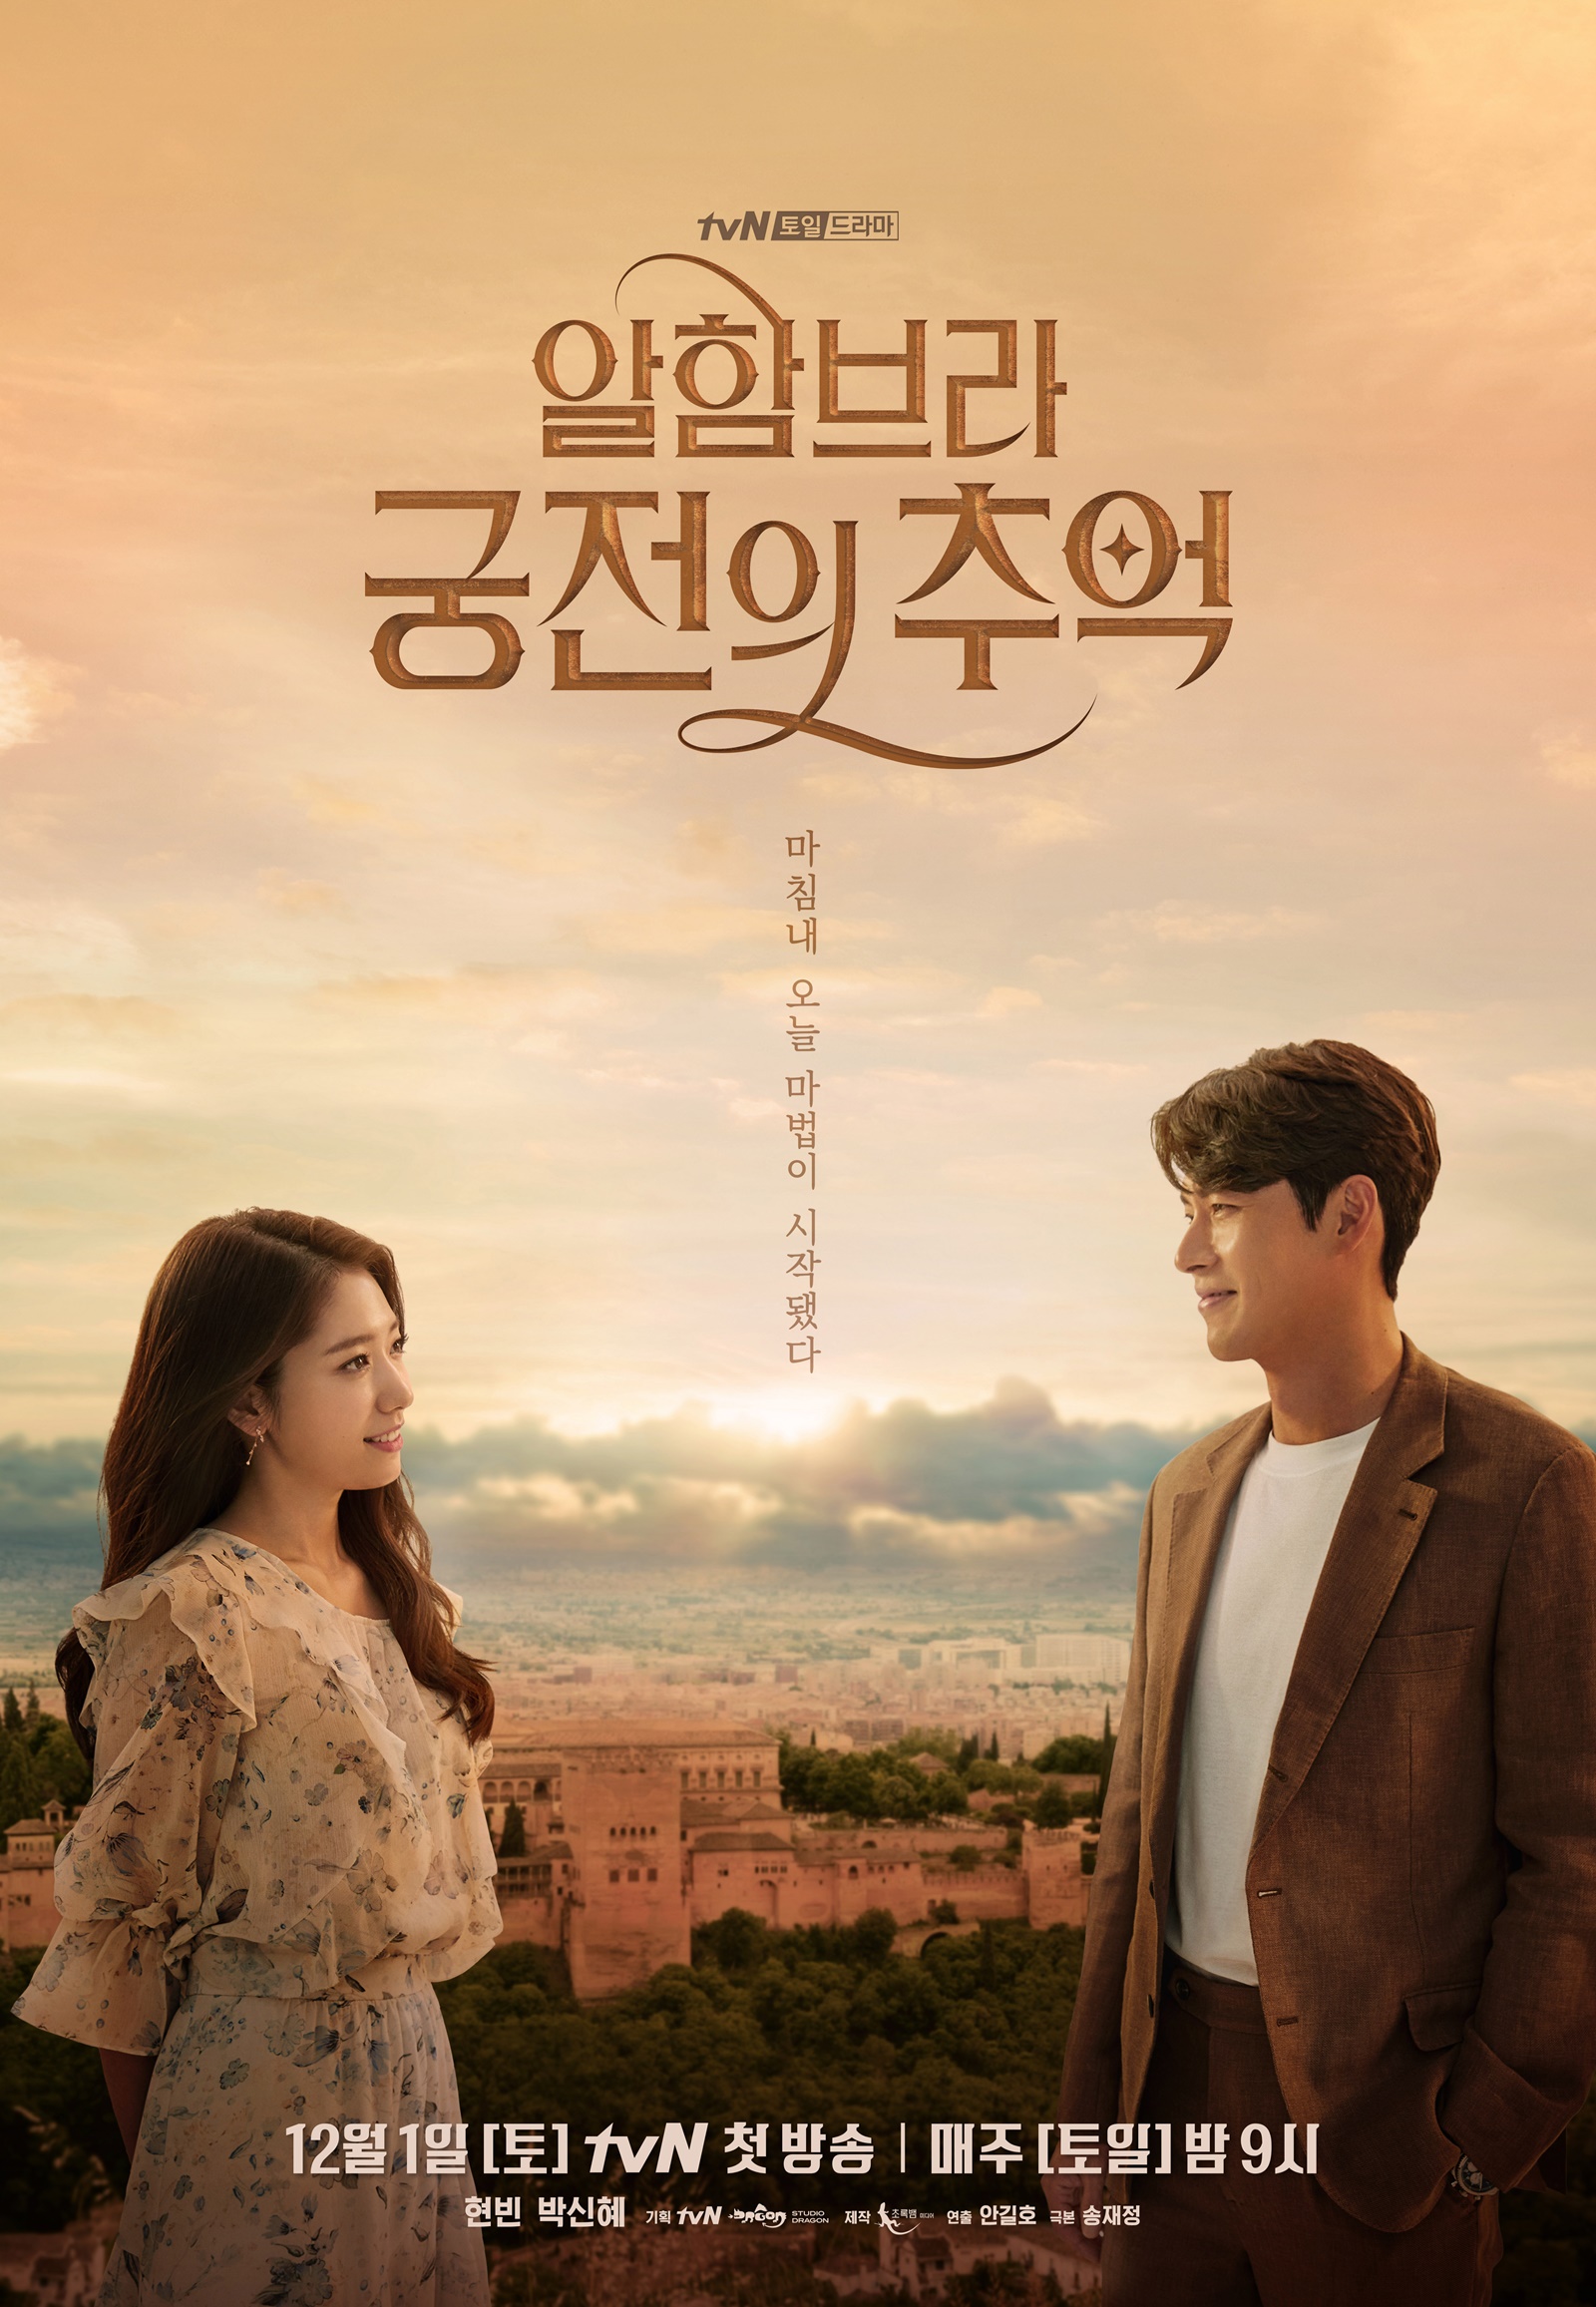 <p>‘Down the Hall’ Yoon Kyun-sang and Kim Yoo-jung was 12 years old car controversy‘boyfriend’ Song Hye-kyo and Donald Trump also 12-year-old band goes silent‘Alhambra...’ Hyun Bin and Park Shin Hye is the ‘relative a’</p><p>Brilliant cast and personality settings that are as eye-catching romance KBS Drama Special 3 this week in the first broadcast. Men and women protagonist to his actors the actual age of the car is 8~12 years old as do I that common. The age difference to overcome and the ‘Chemie’of viewers resonate with interest.</p><p>26, JTBC ‘once hot, clean’first to have to. While the popularity of the webtoon is the original. Cleaning the humanitarian mission and the sublime act as here are the cleaning Agency business body CEO joists(Yoon Kyun-sang)and cleanliness than the survival of a priority job, a way of life. Sol(Kim Yoo-jung)or the pole and polar line with each other to understand and love that story. Each distressed and hurt than to raise the military picture at this age youth up.</p><p>Once hot, clean the’cast confirmed behind the main actors were the age of the car is controversial. Yoon Kyun-sang is the year twenty-old Kim Yoo-jung than 12 years old. Sub male protagonist, Song Jae-Rim is Yoon Kyun-sang than 2 years older. Kim Yoo-jung is popular in the area the image is strong because the age difference is more greatly felt.</p><p>28, Song Hye-kyo and Donald Trump meeting with topic becomes a tvN ‘boyfriend’is first broadcast. Politicians daughter born tycoon is on the poems went..... after the divorce alimony received as a Hotel that operates on the dimensions, the expression(Song Hye-kyo)and the dimensions, the representation of the Hotel in employment for new employees Kim Jin-Hyuk(Donald Trump)and a traditional marshmallow. Mauricio employment service-time to save money with the company before leaving Cuba to travel in the car the lake to meet two people fall in love with the Settings very early in Cubas picturesque scenery viewers.</p><p>Song Hye-kyo 1993 life in the UK test than the 12-year-old. Last 21, open production presentation in Song Hye-kyo is the age differences in the concerns about “KBS Drama Special, the same goes with if I see a problem, but reminiscent to that one Hotel announced to staff that set because there is a large burden is not,”he says.</p><p>Next month 1 days in tvNs another ambitious ‘Alhambra Palace memories’started. In 10 years the industrys largest IT investment company of a type not individual figures that we With You(Hyun Bin minutes)to travel car Spain Granada went to former guitarist Jung-hee(Park Shin Hye minutes)to operate a cheap hostel in silence in the elusive hunt ... </p><p>A whole other world, and belong to the two men she encounters magic and science, analog and Digital, such as contrast mixed with the love and human desires related to the story line. AR(virtual reality)game with a different story also eye-catching. The two actors the actual age of the car is 8 years old.</p><p> - The copyright owner ⓒ -</p>